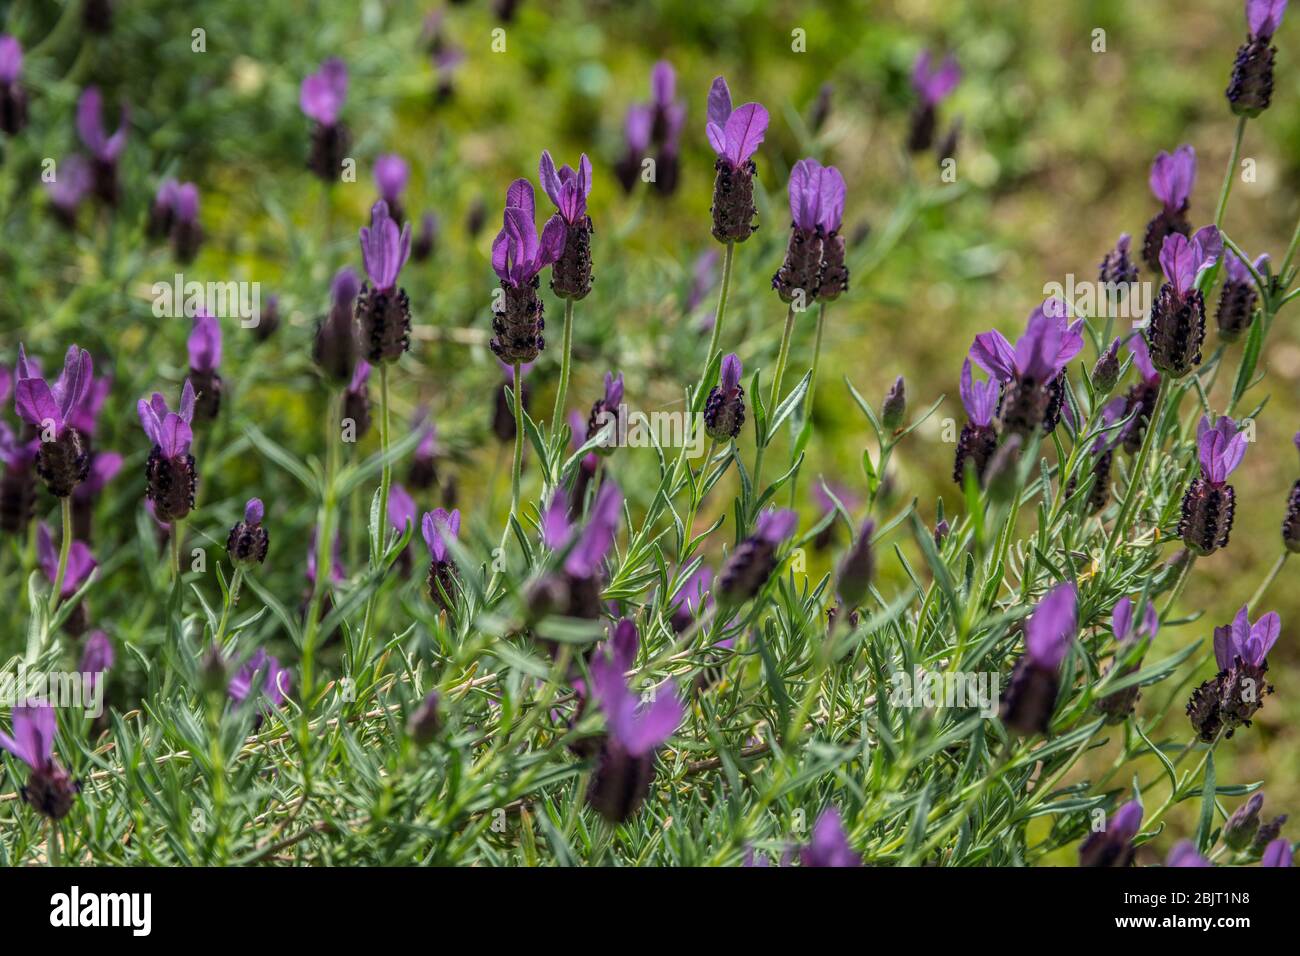 Selective focus on the vibrant purple flowers of a grouping of Spanish lavender plants in full bloom on a sunny day in late spring Stock Photo